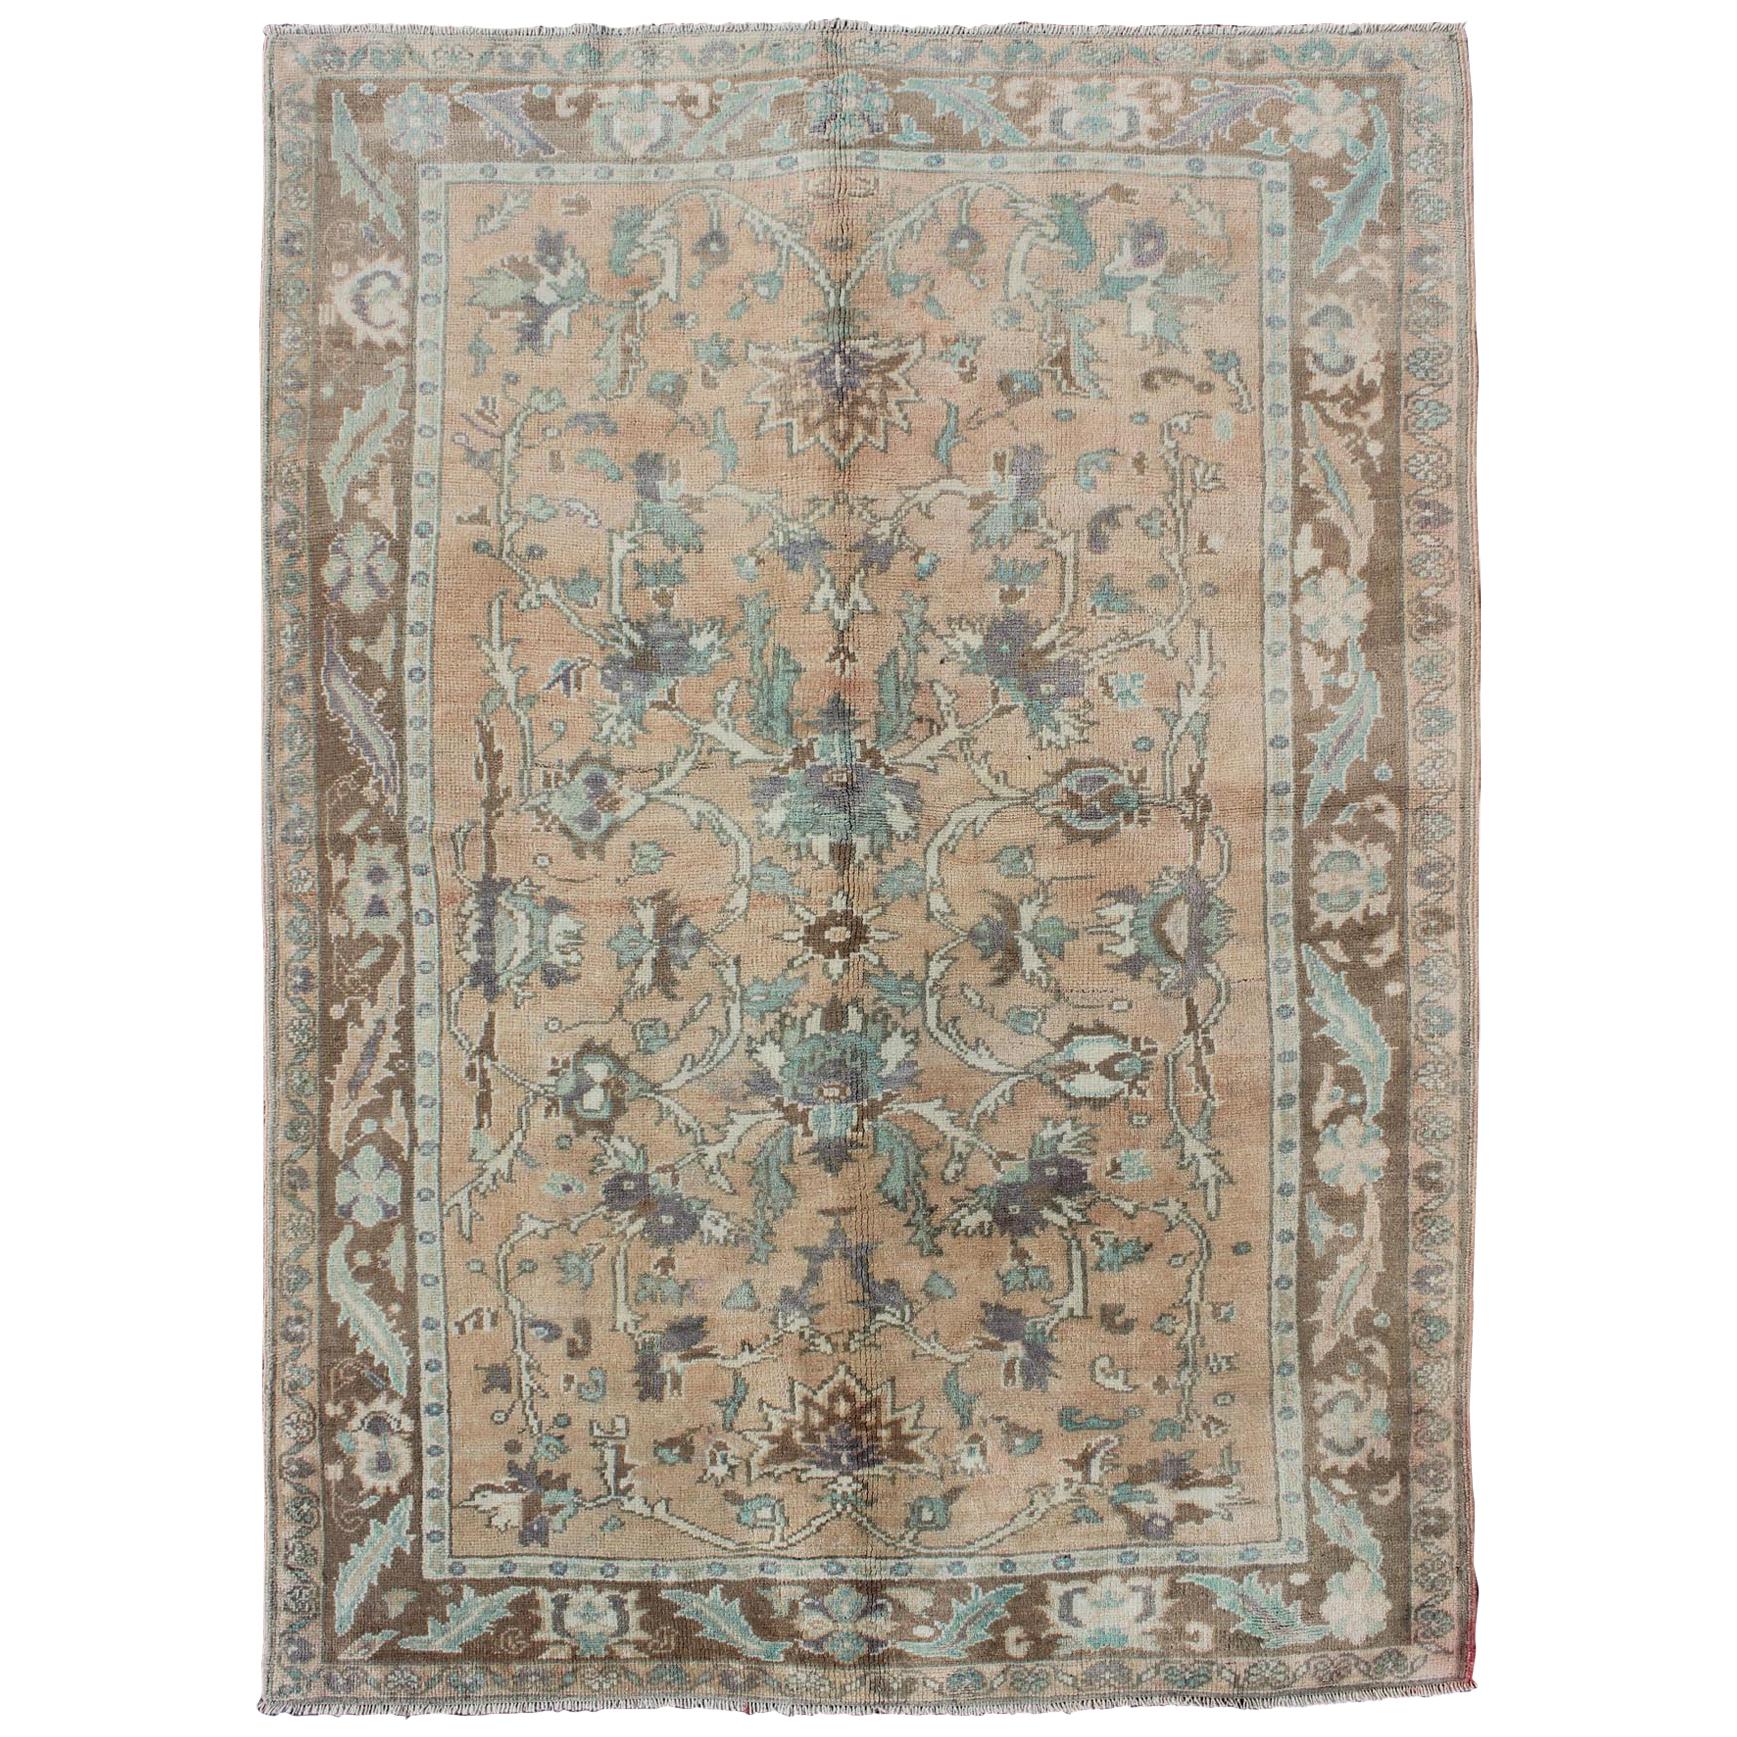 Elegant Floral Vintage Turkish Oushak Rug in Cream, Green, Light Peach and Brown For Sale